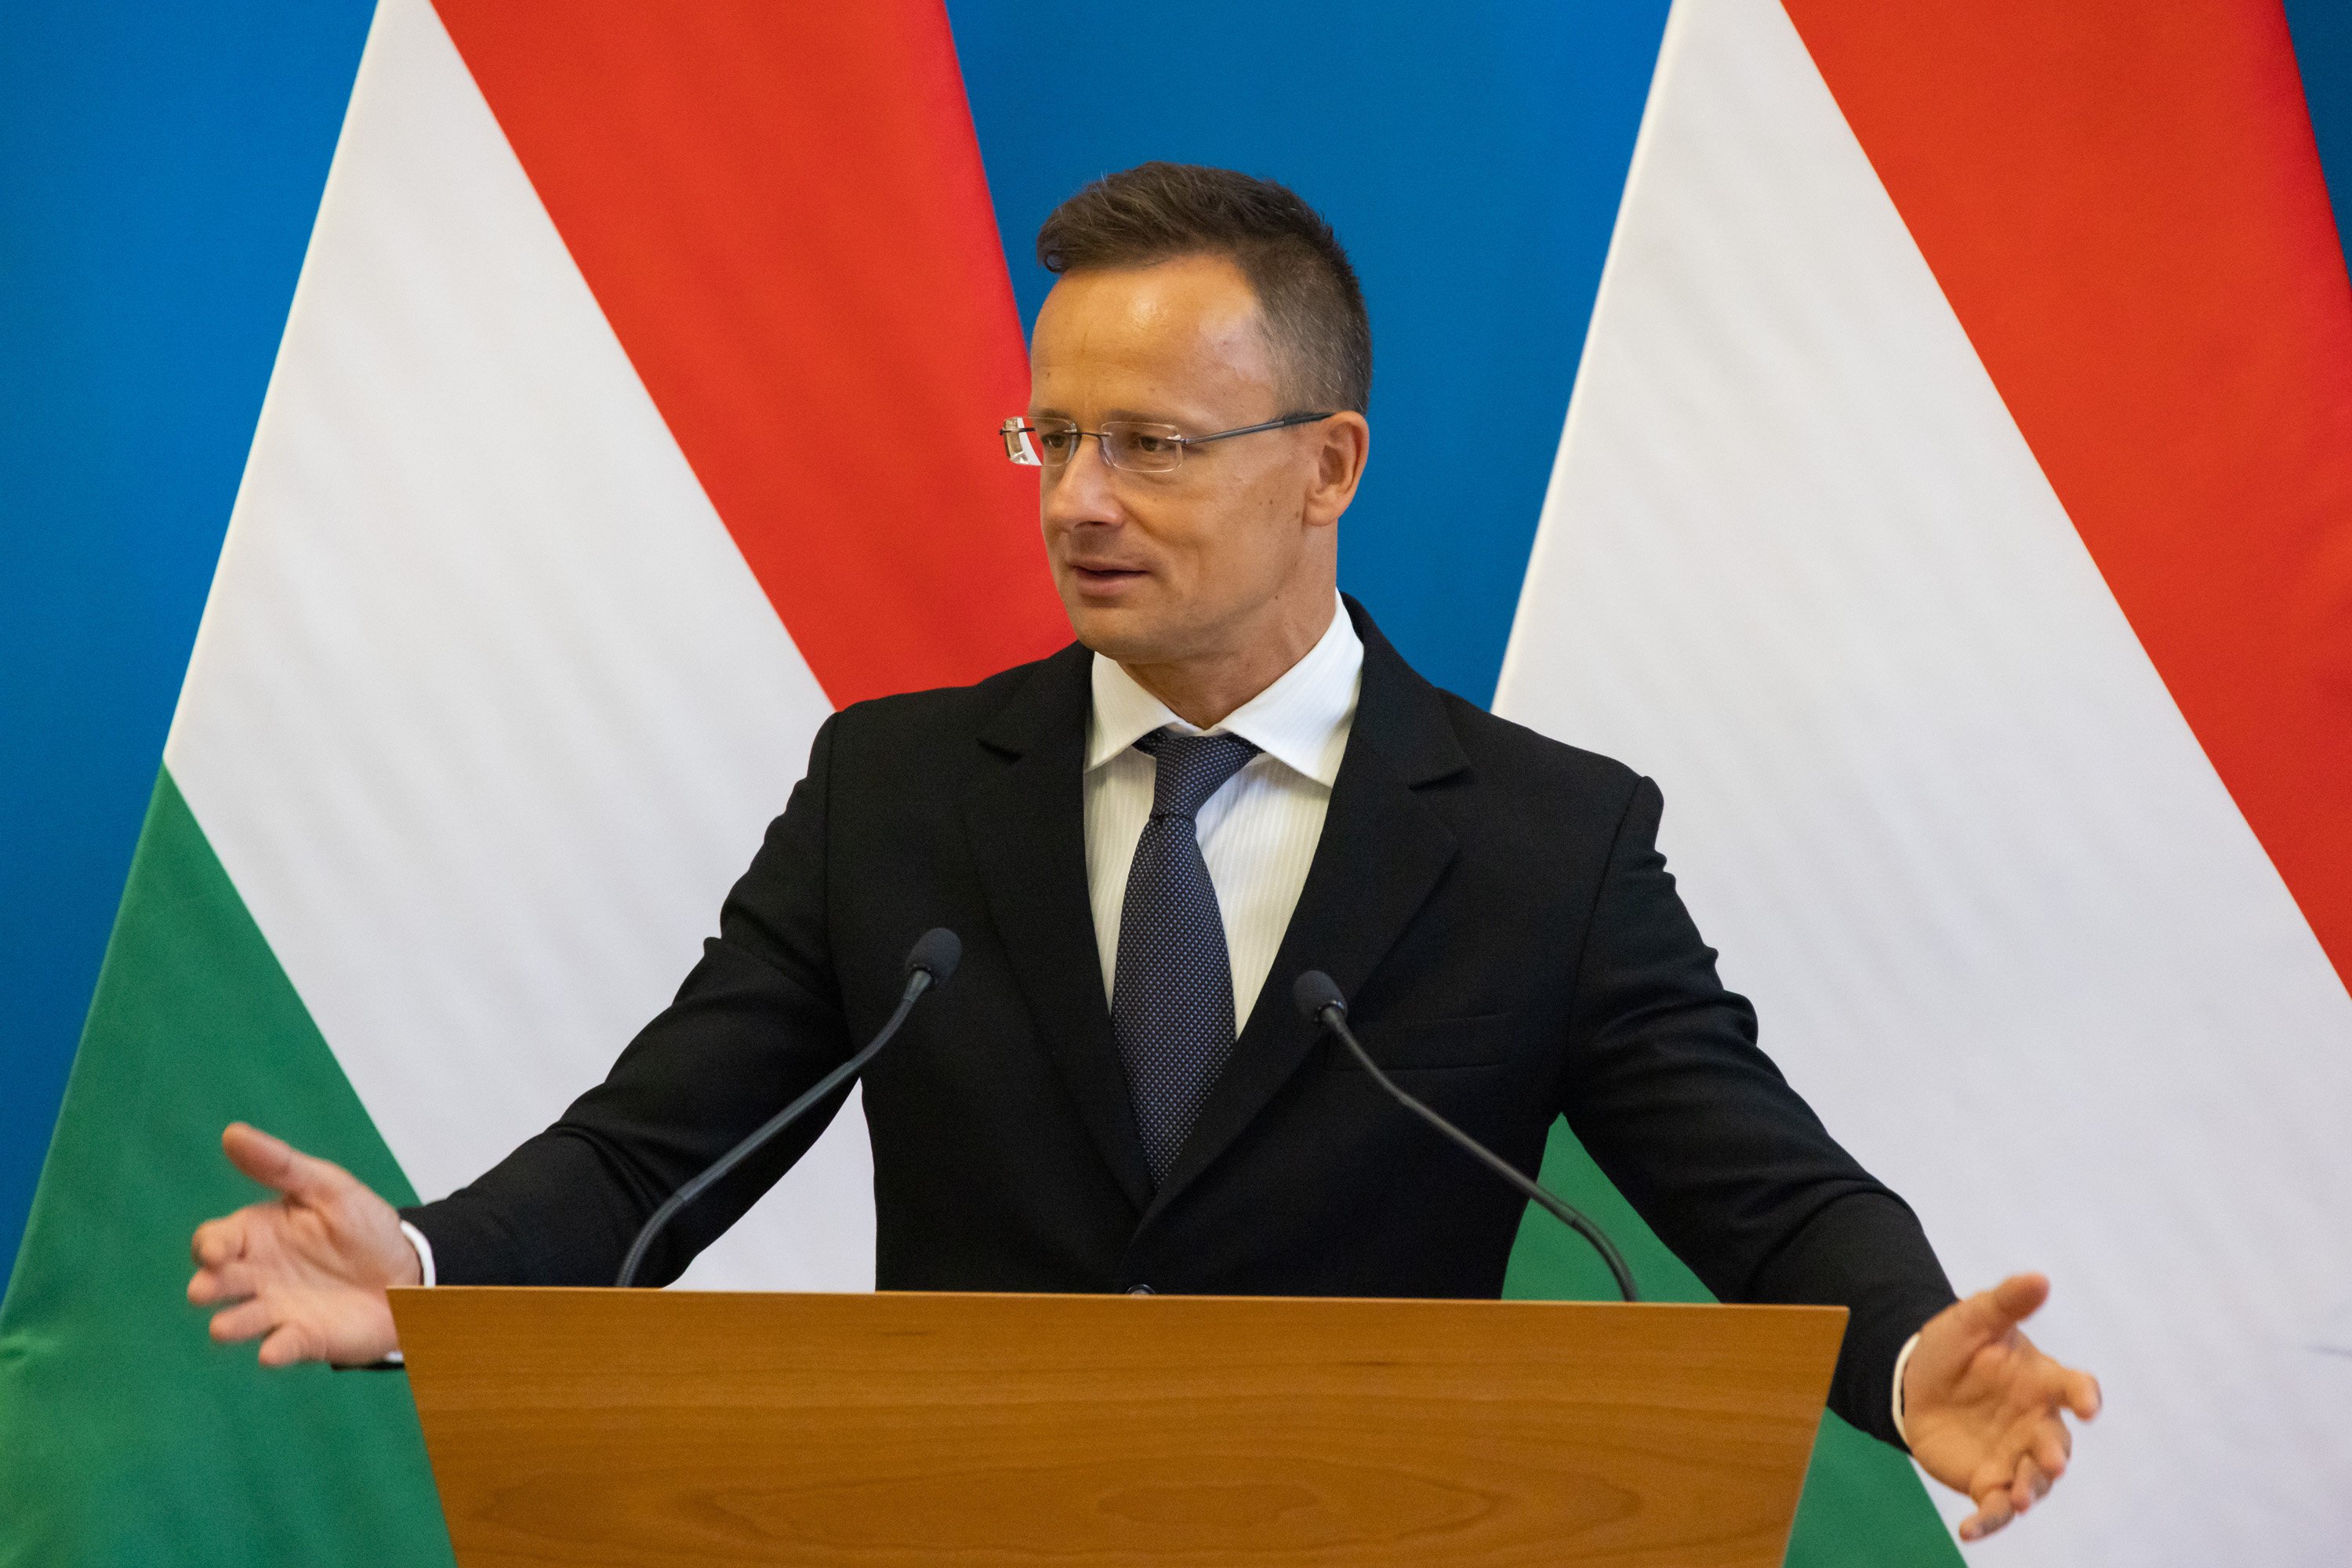 Hungarian Foreign Minister Peter Szijjarto says the EU should expand economic cooperation with Beijing, especially in electric vehicles. Photo: Xinhua